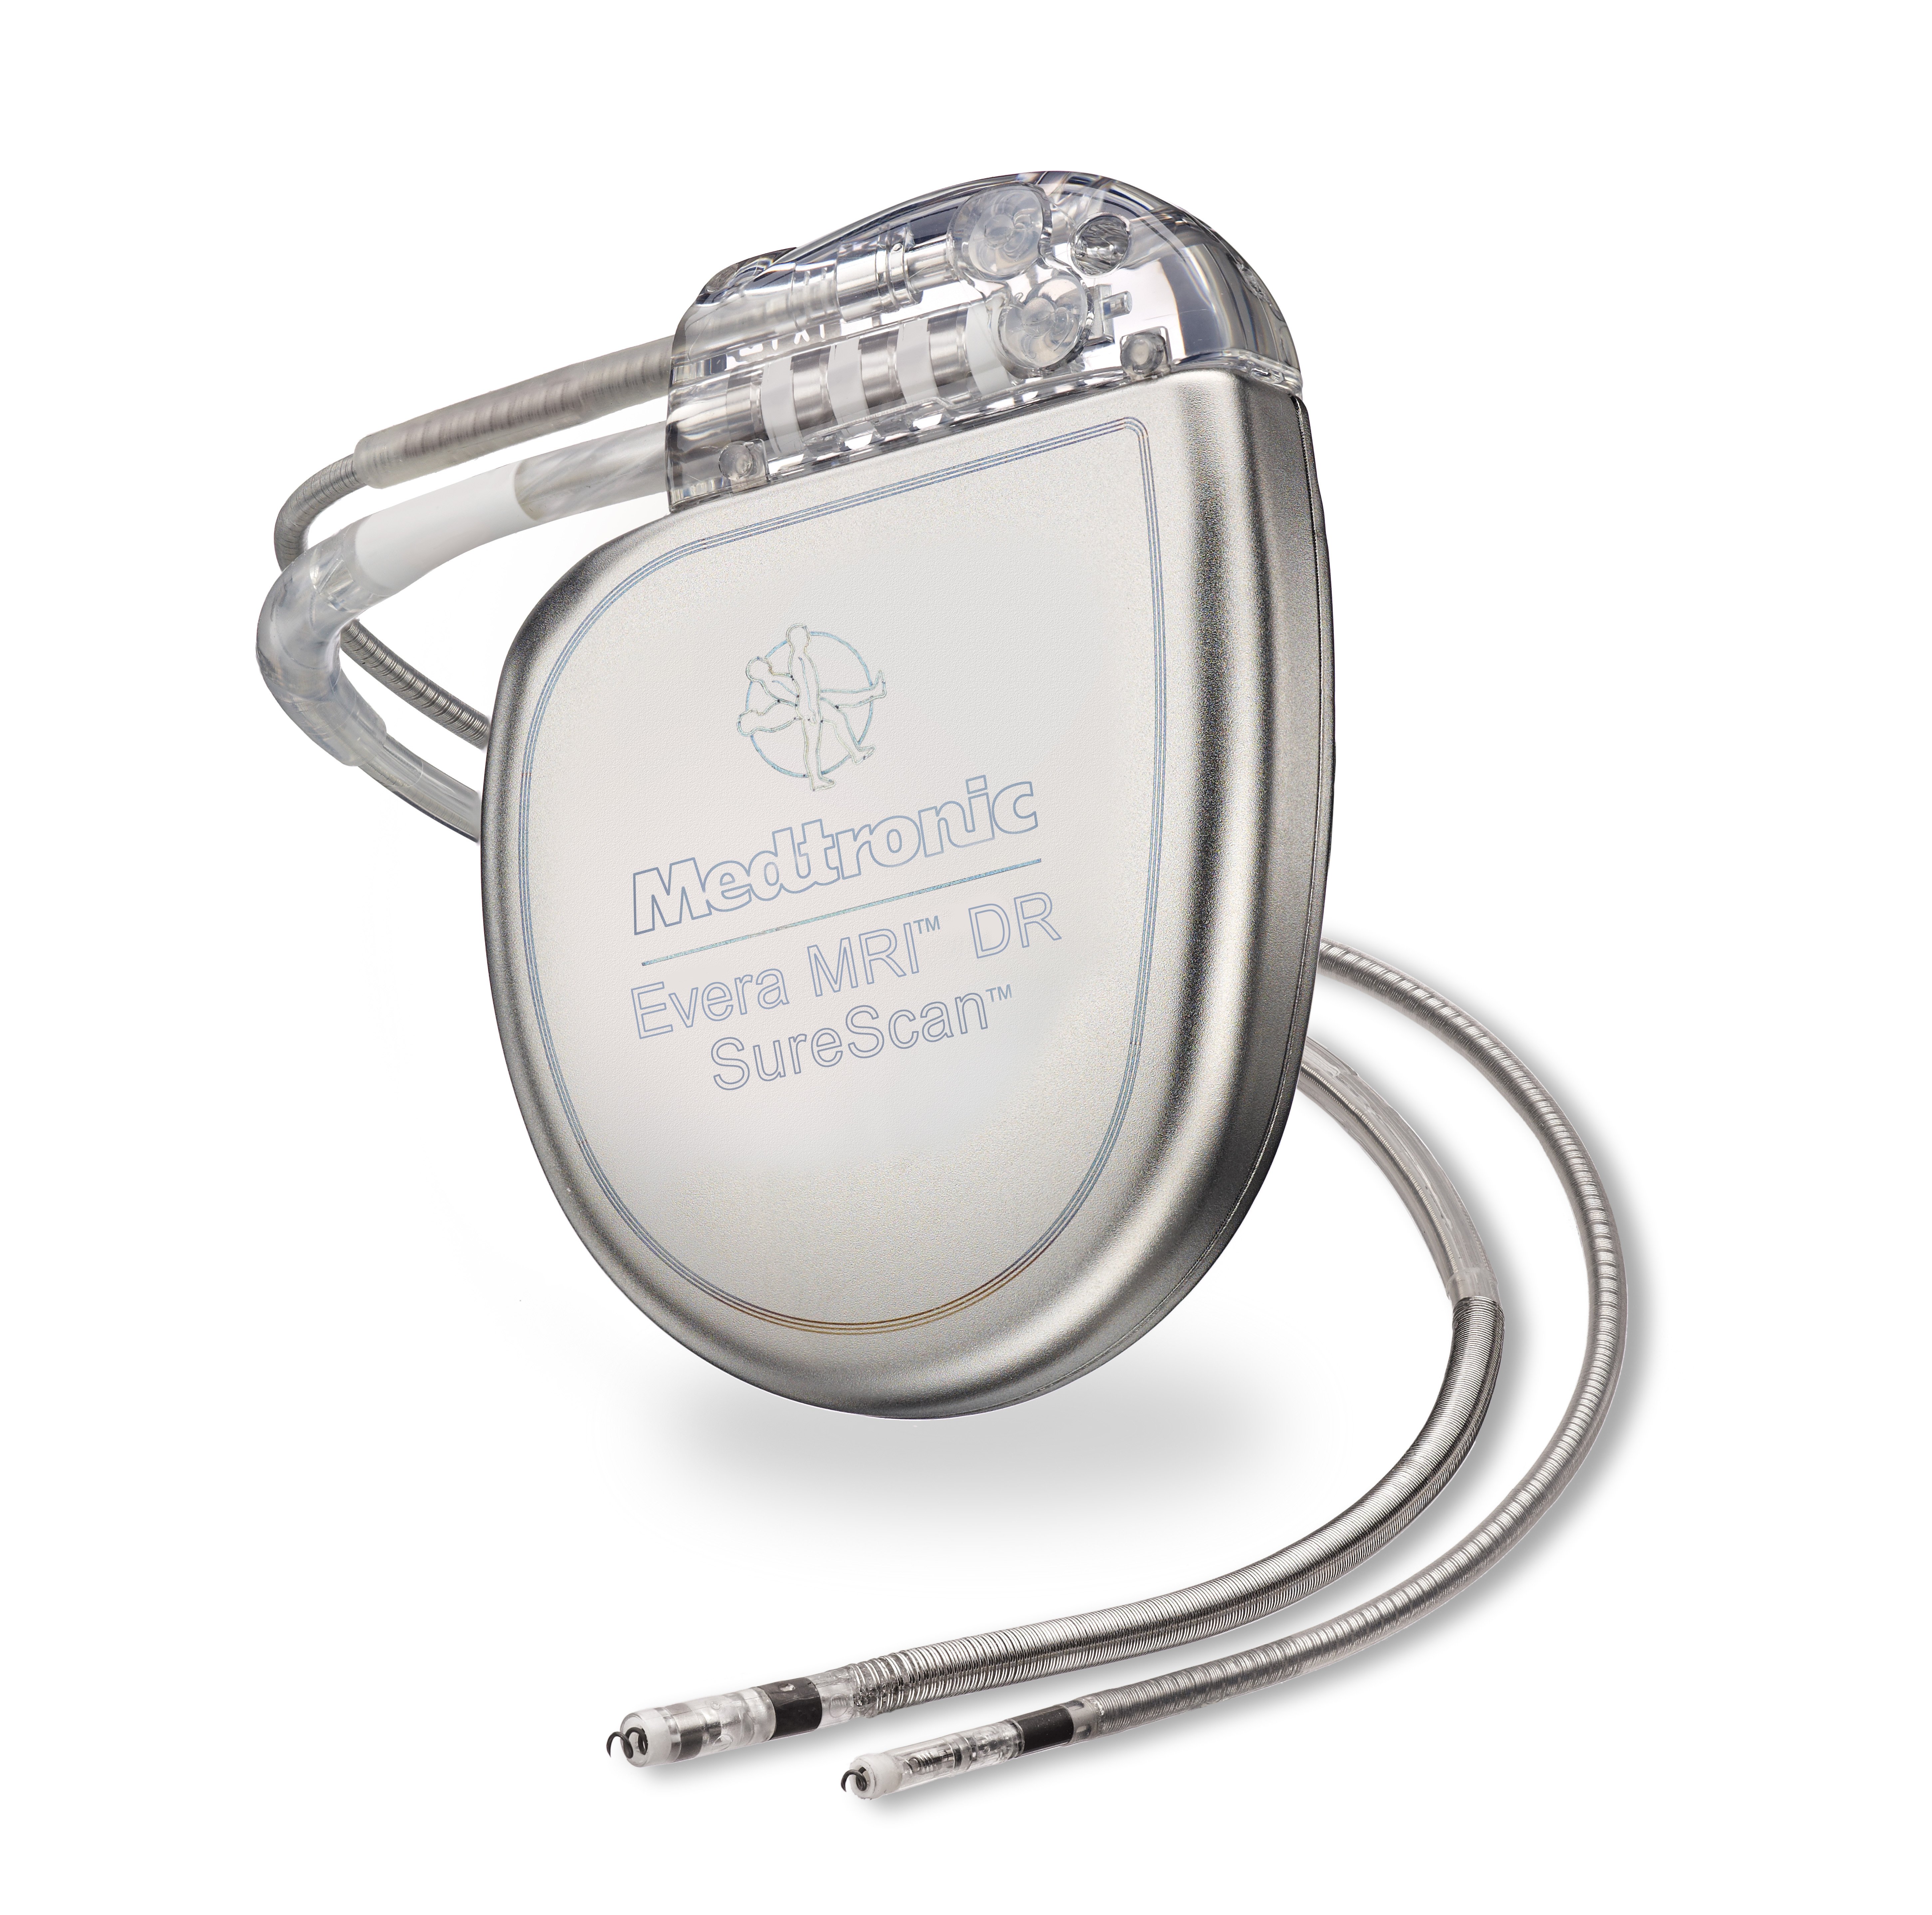 Medtronic Receives FDA Approval for MRconditional